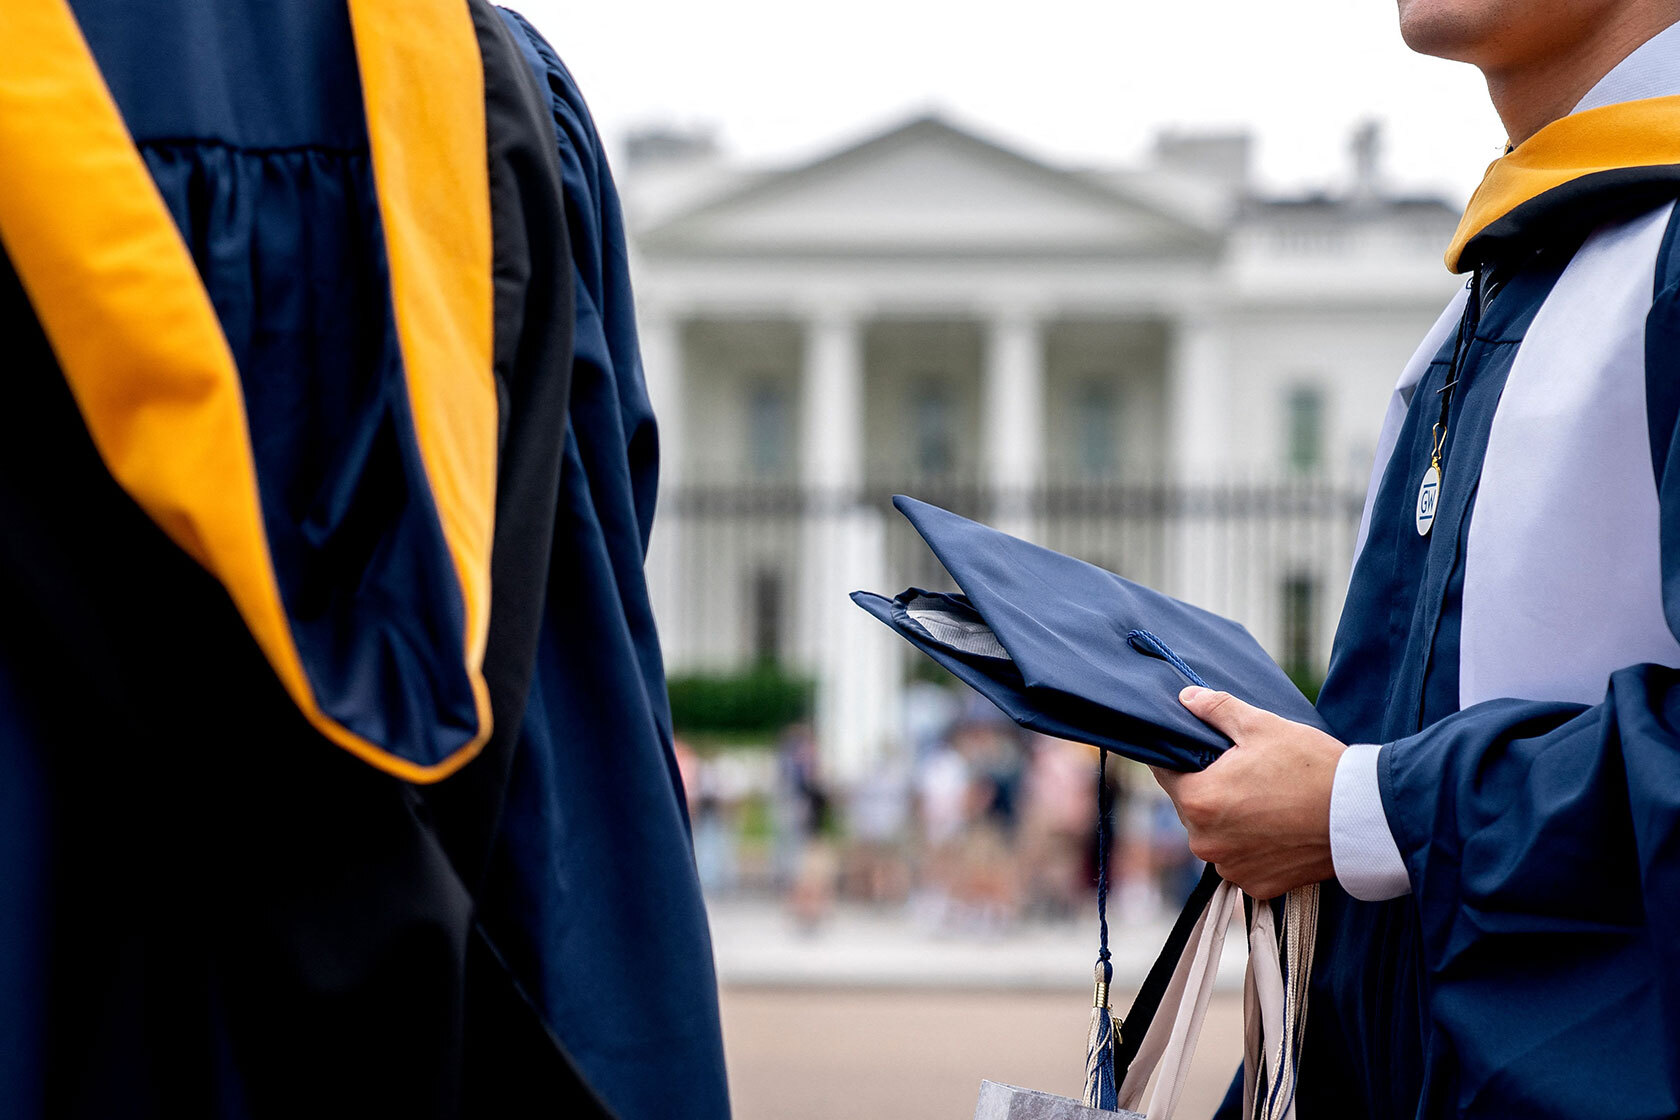 Students wear their graduation gowns outside of the White House.